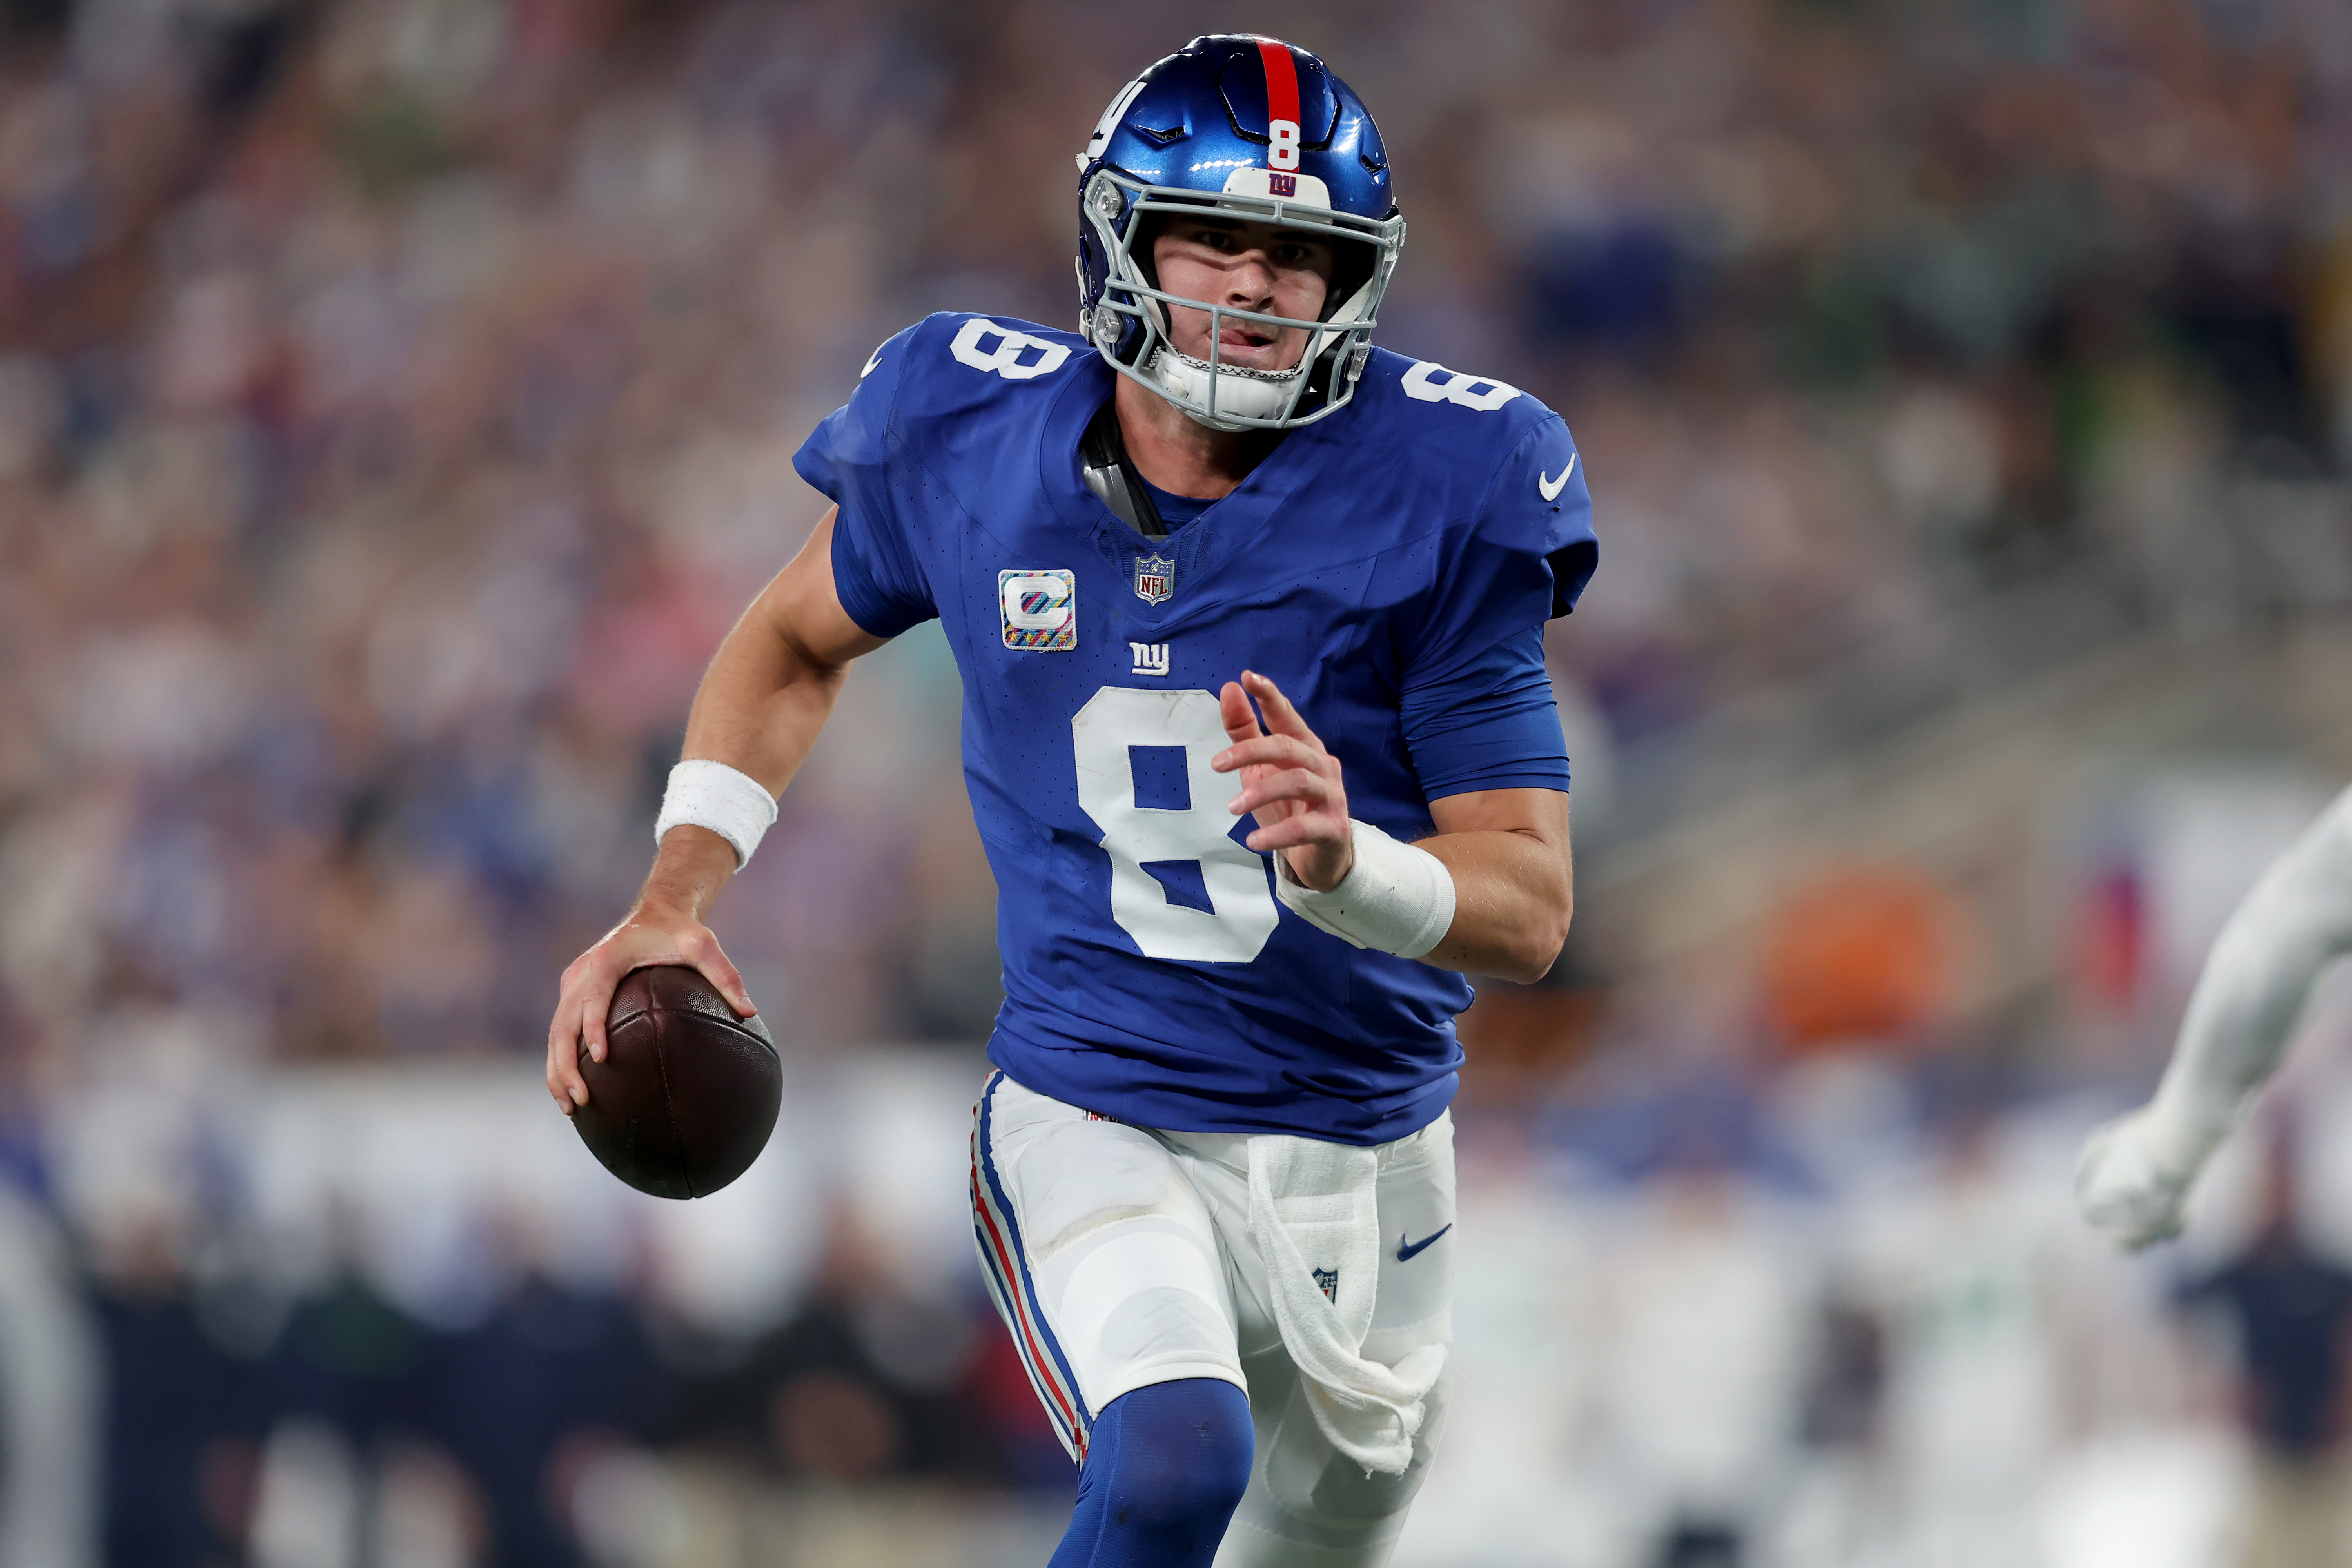 Giants Super Bowl odds: What are New York's chances of winning